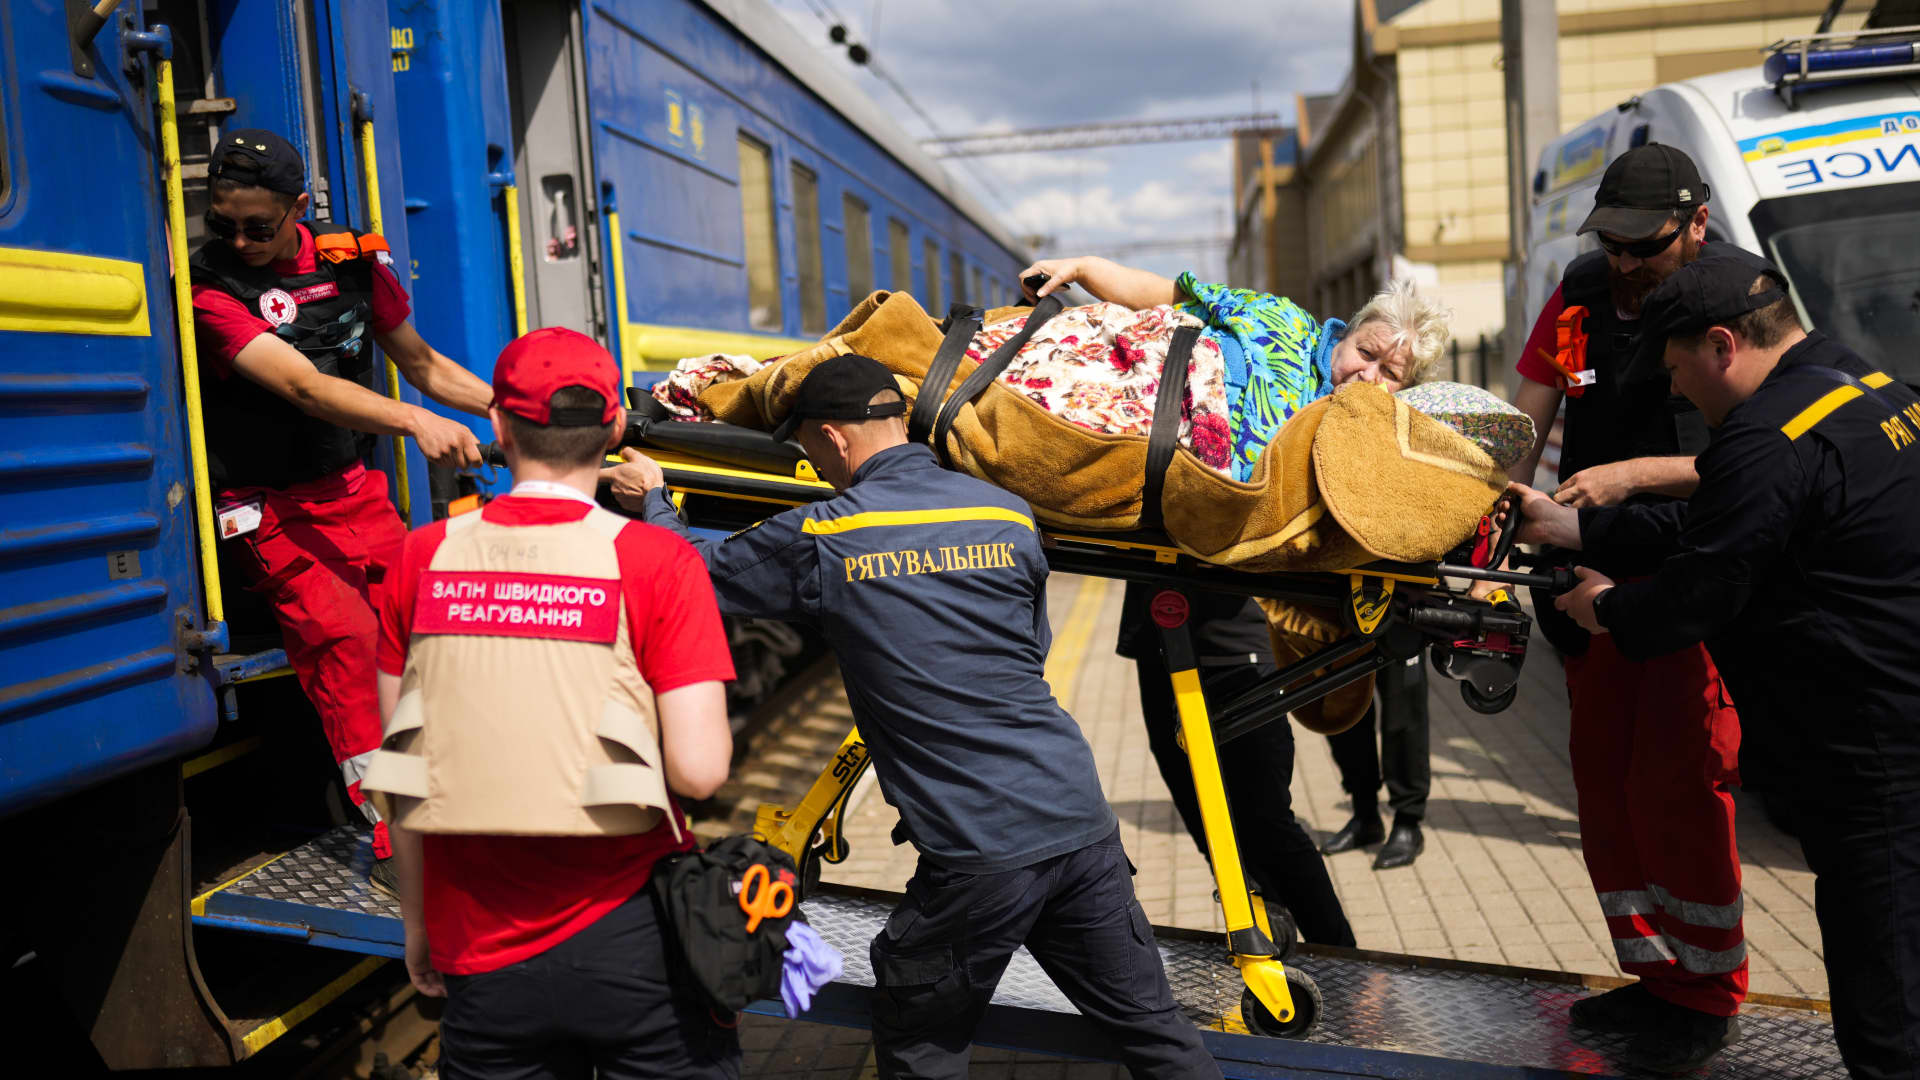 A patient is carried on a stretcher to board a medical evacuation train run by MSF (Doctors Without Borders) at the train station in Pokrovsk, eastern Ukraine, Sunday, May 29, 2022.